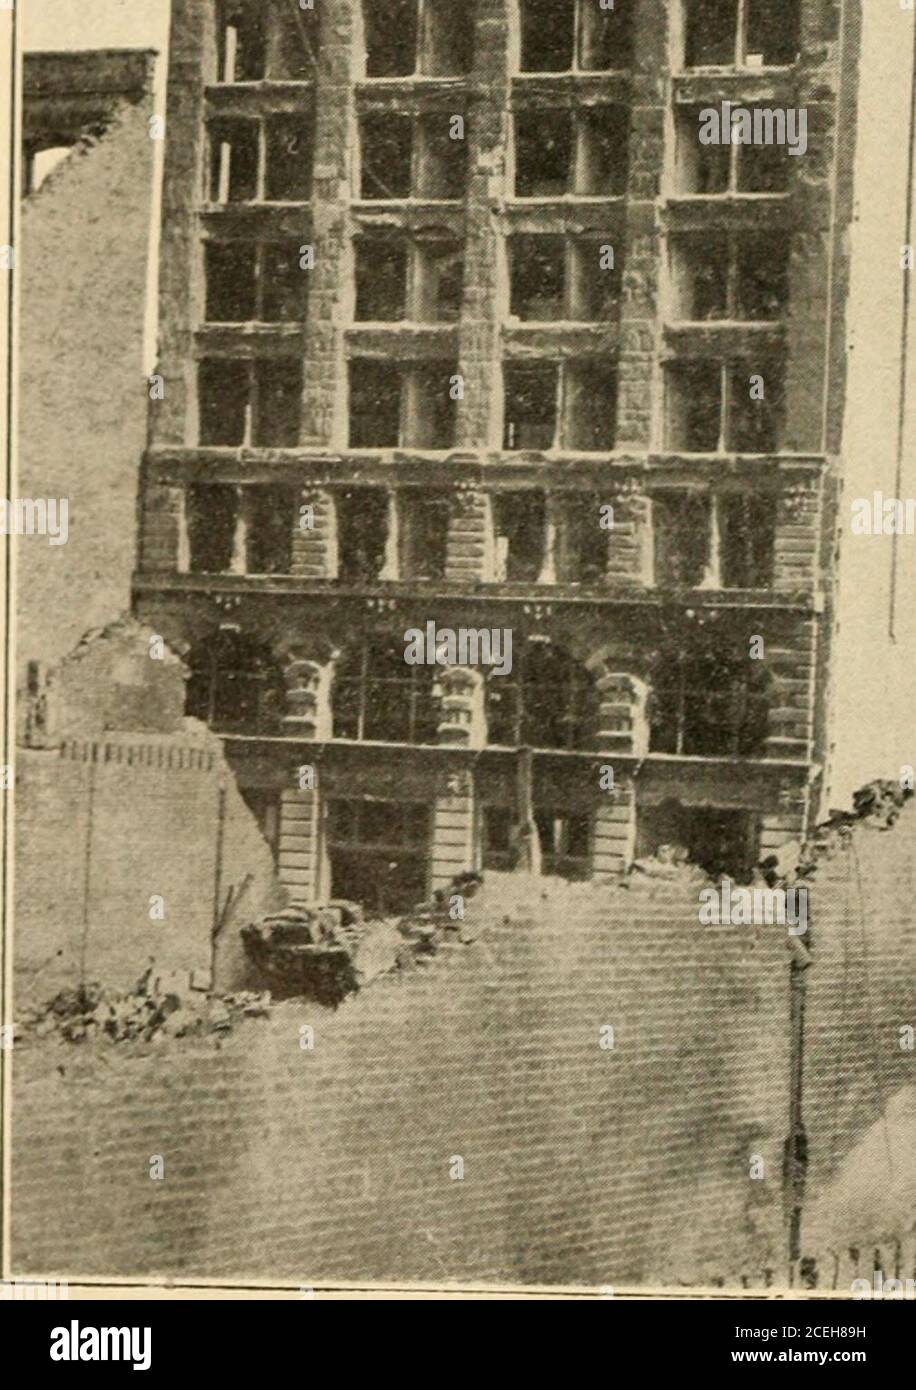 . A history of the earthquake and fire in San Francisco; an account of the disaster of April 18, 1906 and its immediate results. would be to enclose the elevator in a brick-walled shaftwith automatic fire doors at the openings on each story. STATEMENT OF RELIEF FUNDS (From Report, Nov. 17, 1906) Receipts from cash subscriptions $6,213,259.28 Expenditures 4,628,452.23 As follows: Housing the Homeless 1,234,094.43 Relief of Hungry 1,146,412.68 Rehabilitation 1,023,166.51 Sanitation 231,020.74 Transportation 171,470.53 Sick and Wounded 147,899.90 Construction and Operation of Permanent Camps 140, Stock Photo